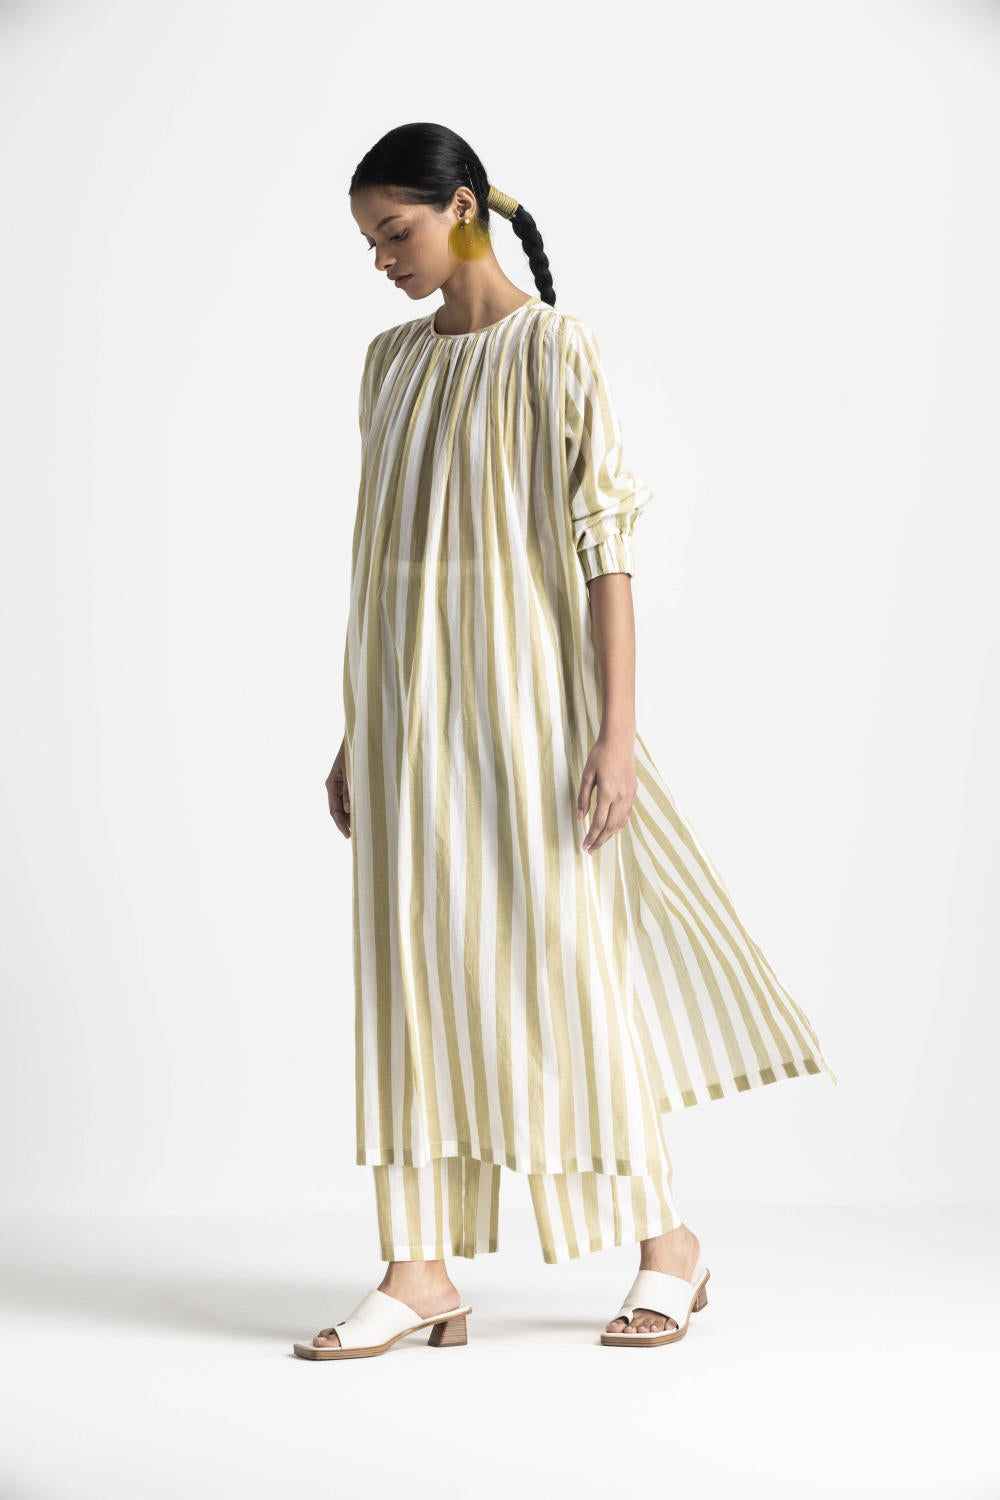 FRONT GATHER DRESS CO ORD - MOSS GREEN STRIPE